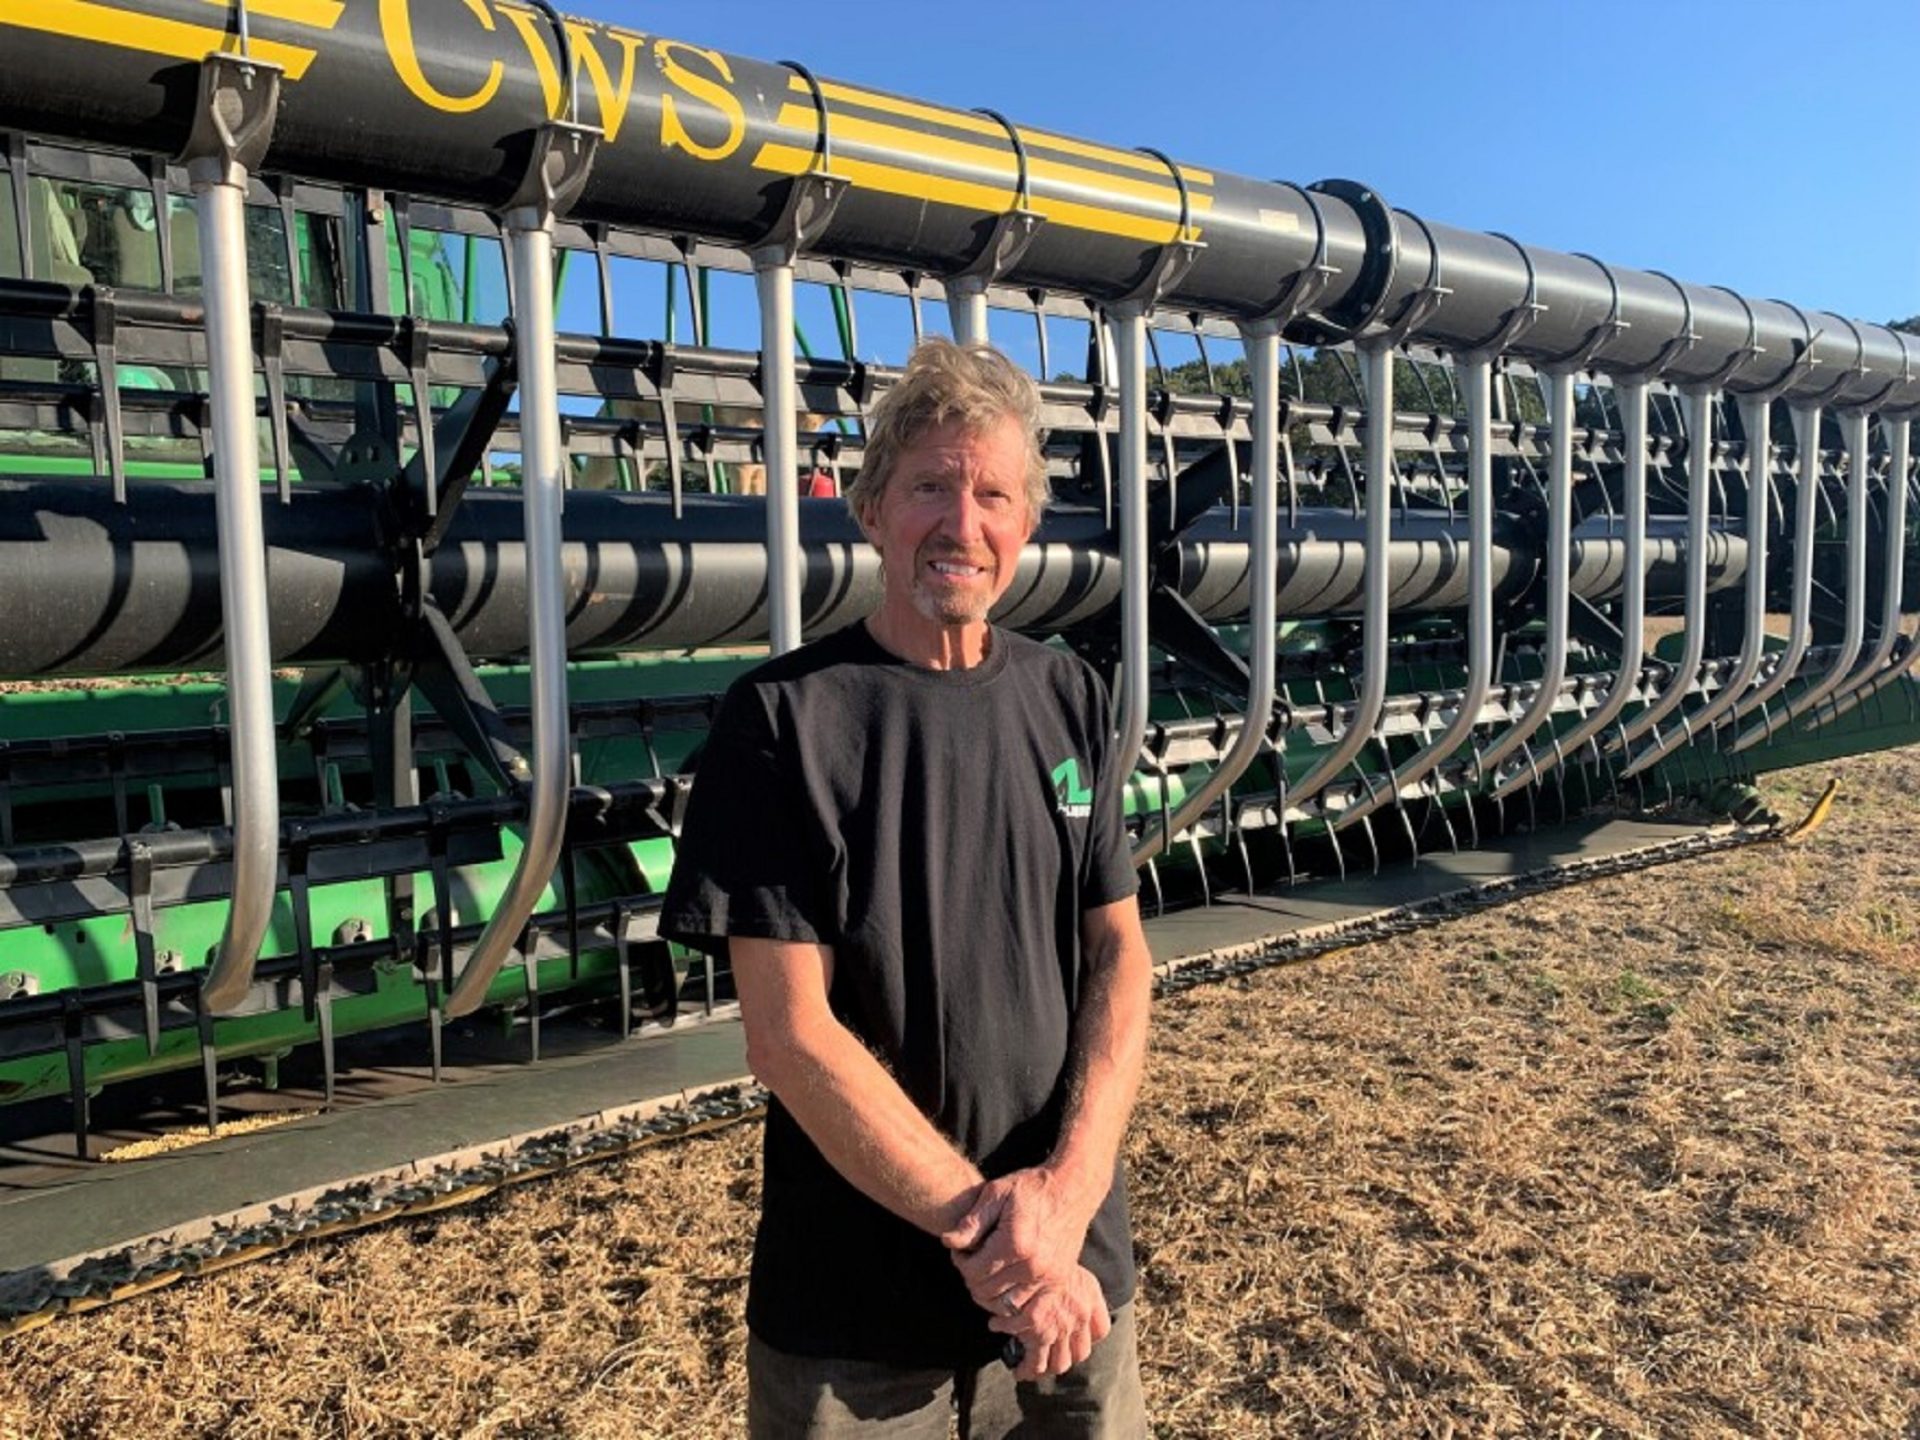 Terry Shields, 62, grows corn, soybeans, and wheat on 1,200 acres in Jefferson County, northeast of Pittsburgh. He represents the fourth generation in his family to farm.